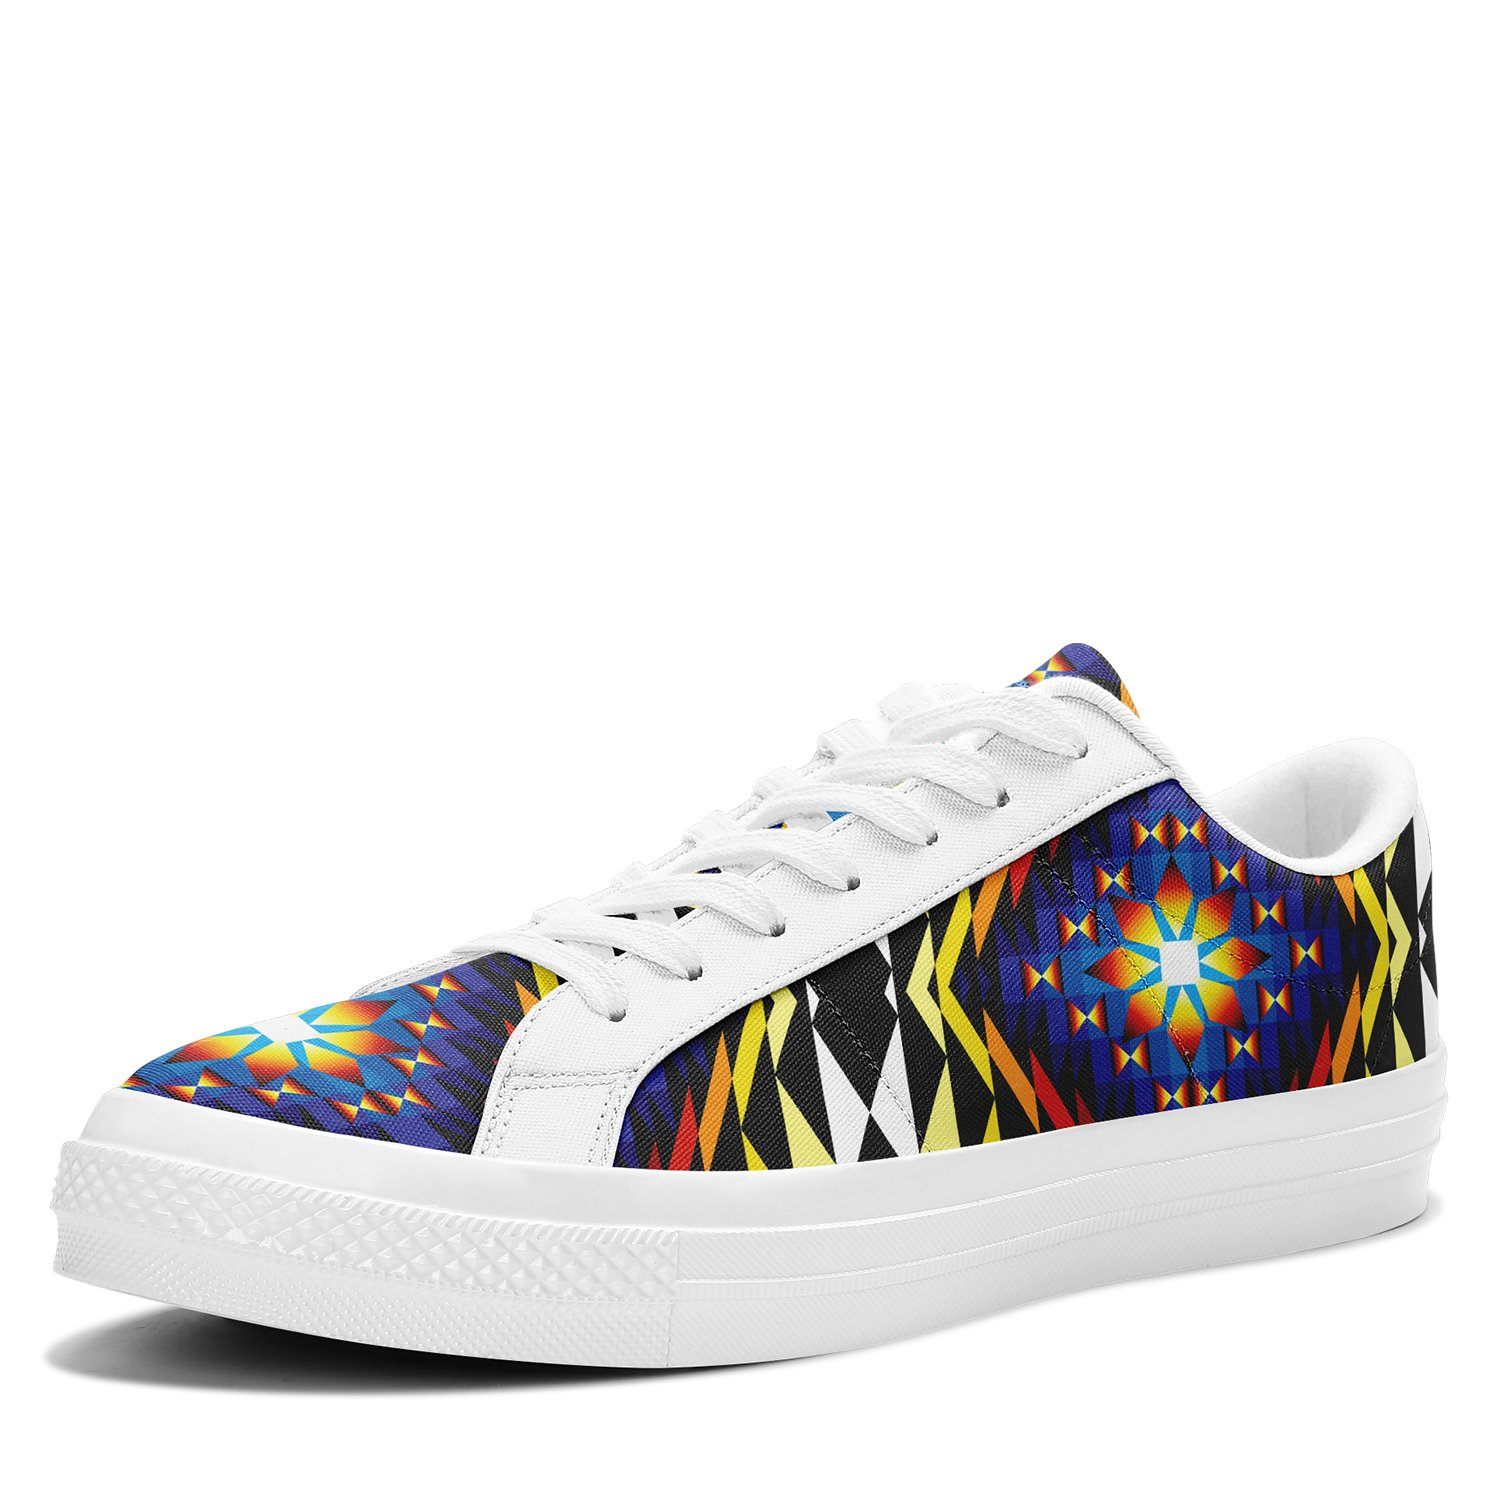 Sunset Blanket Aapisi Low Top Canvas Shoes White Sole 49 Dzine 